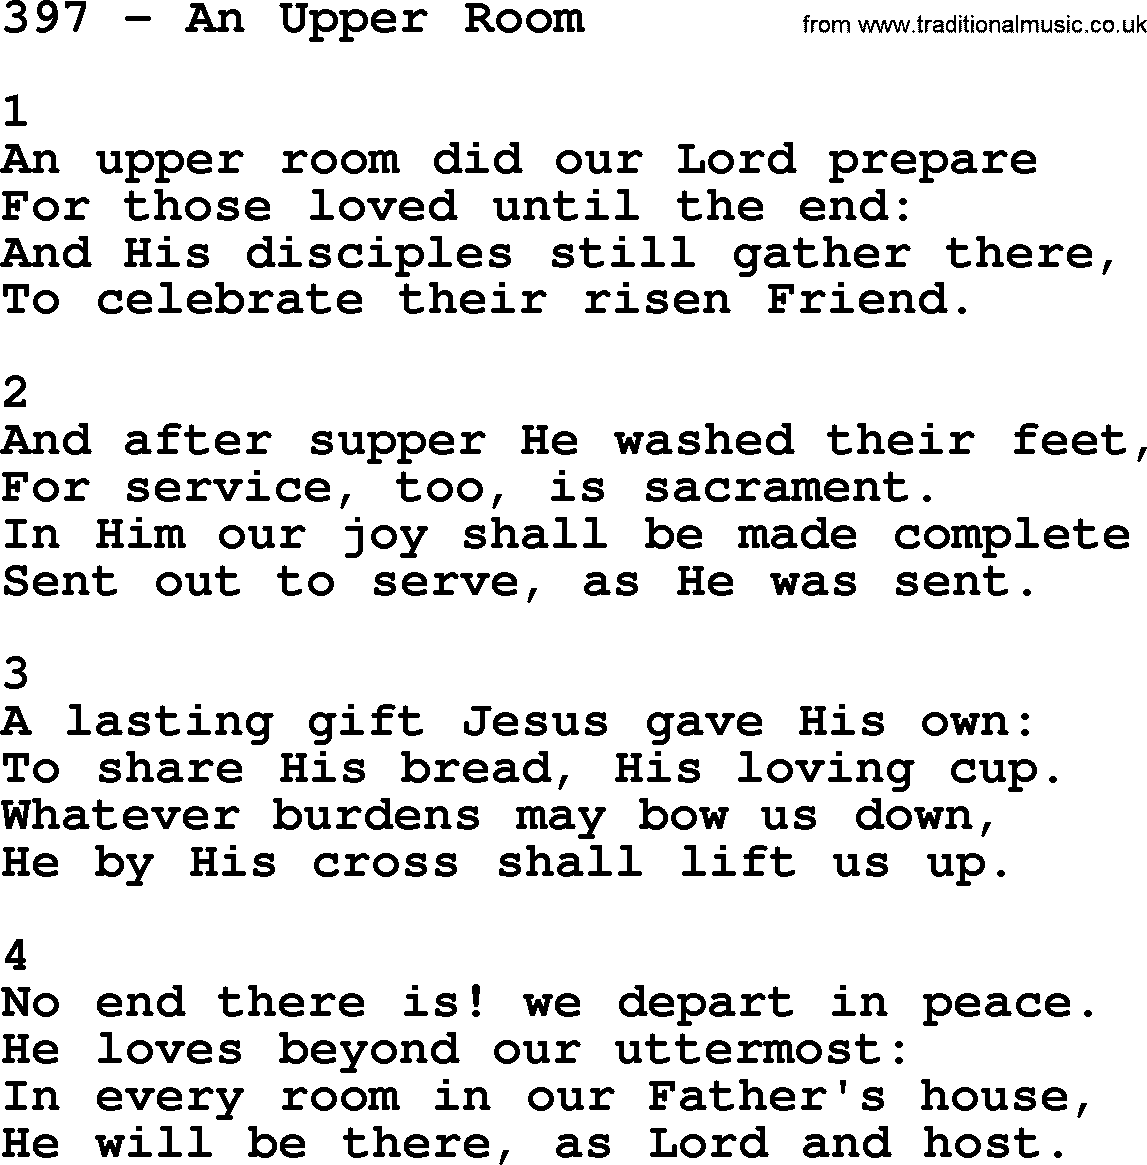 Complete Adventis Hymnal, title: 397-An Upper Room, with lyrics, midi, mp3, powerpoints(PPT) and PDF,